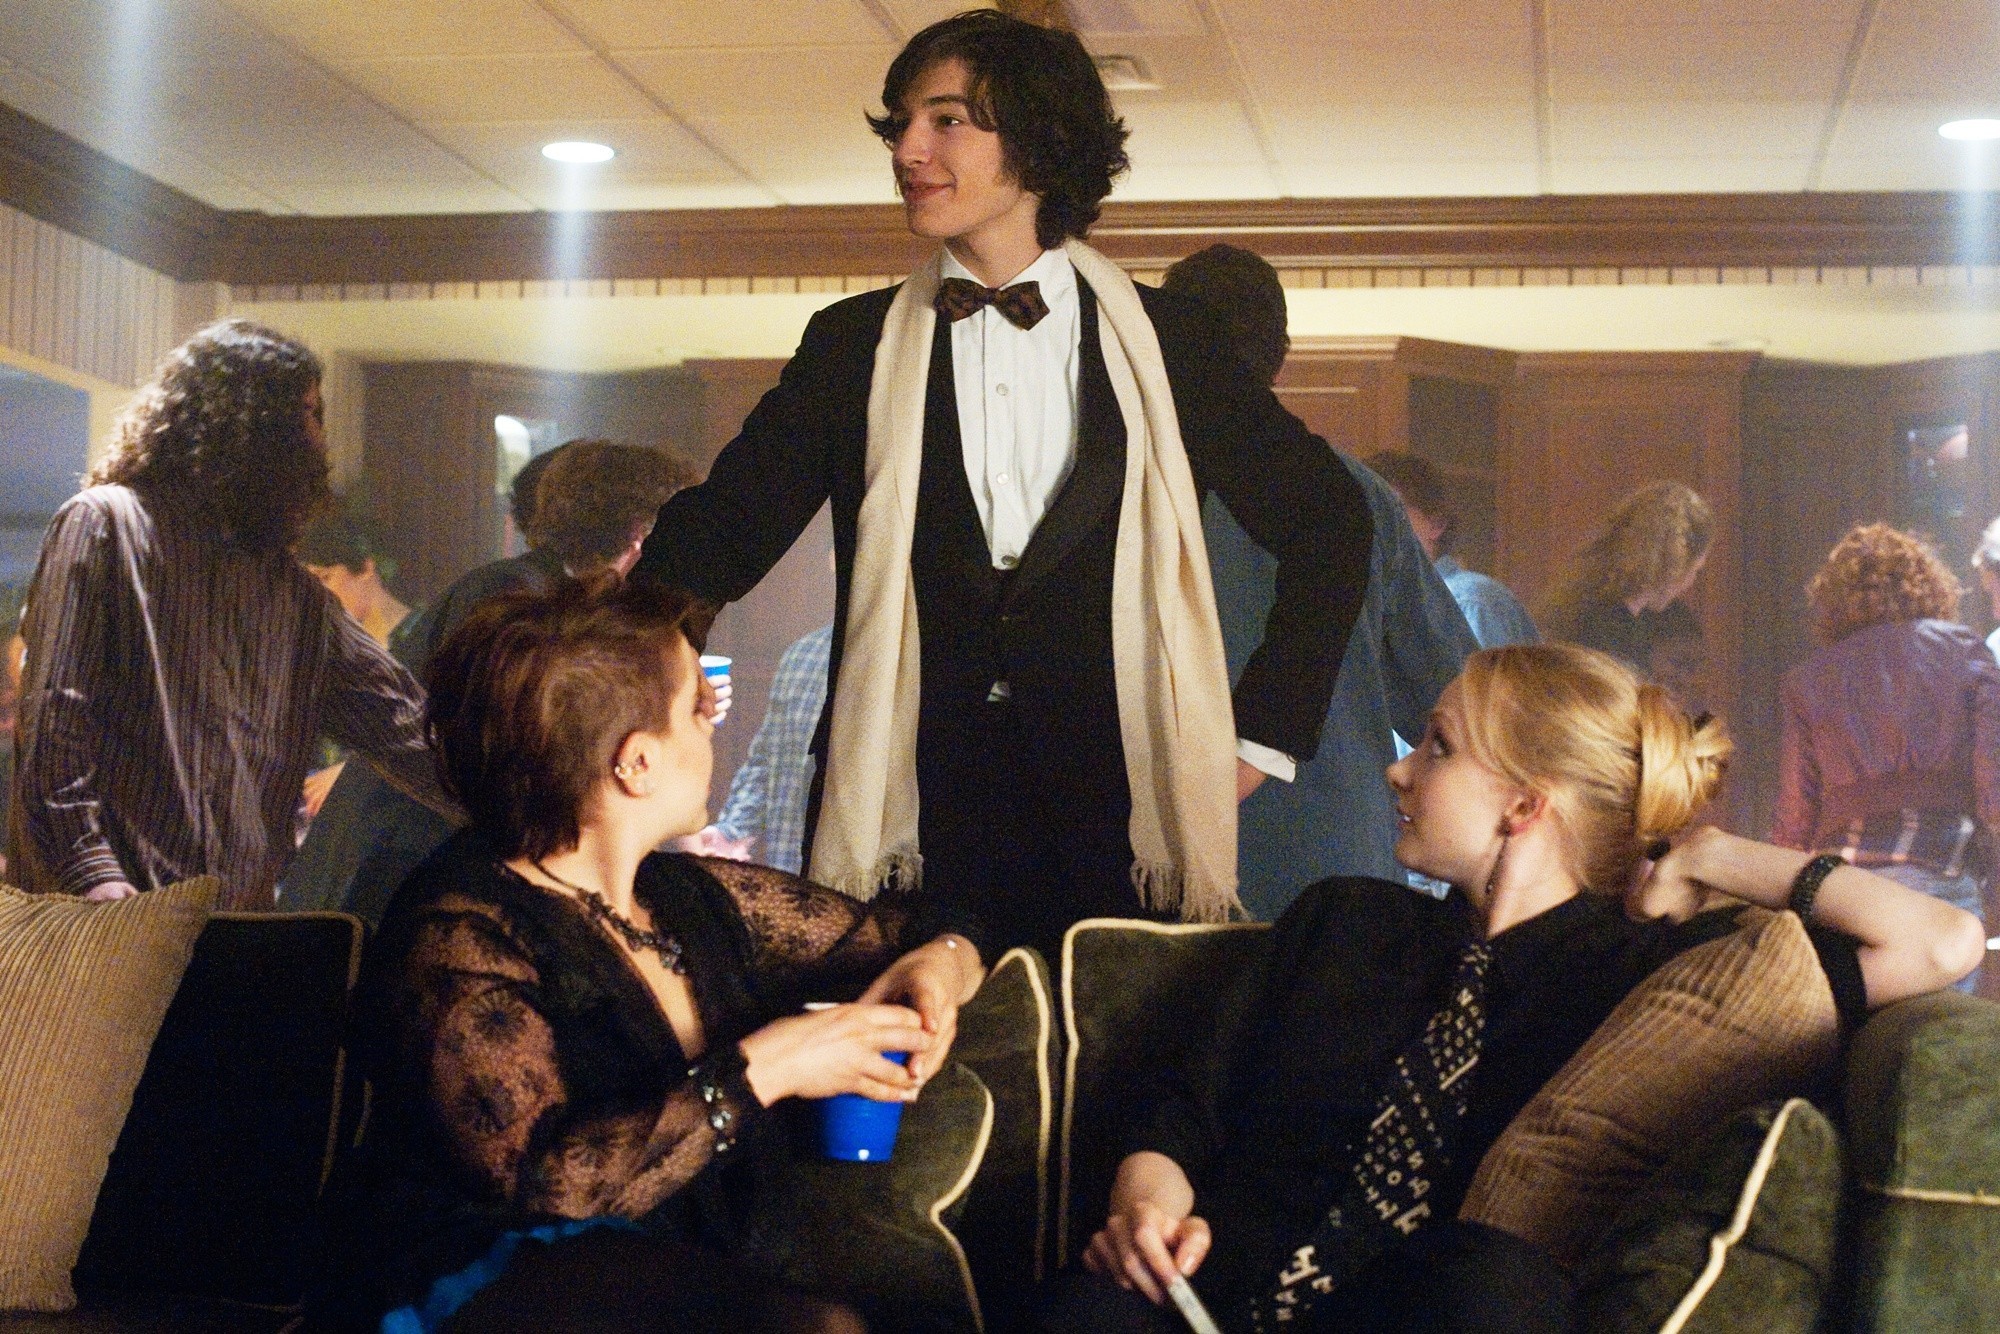 Mae Whitman, Ezra Miller and Erin Wilhelmi in Summit Entertainment's The Perks of Being a Wallflower (2012)